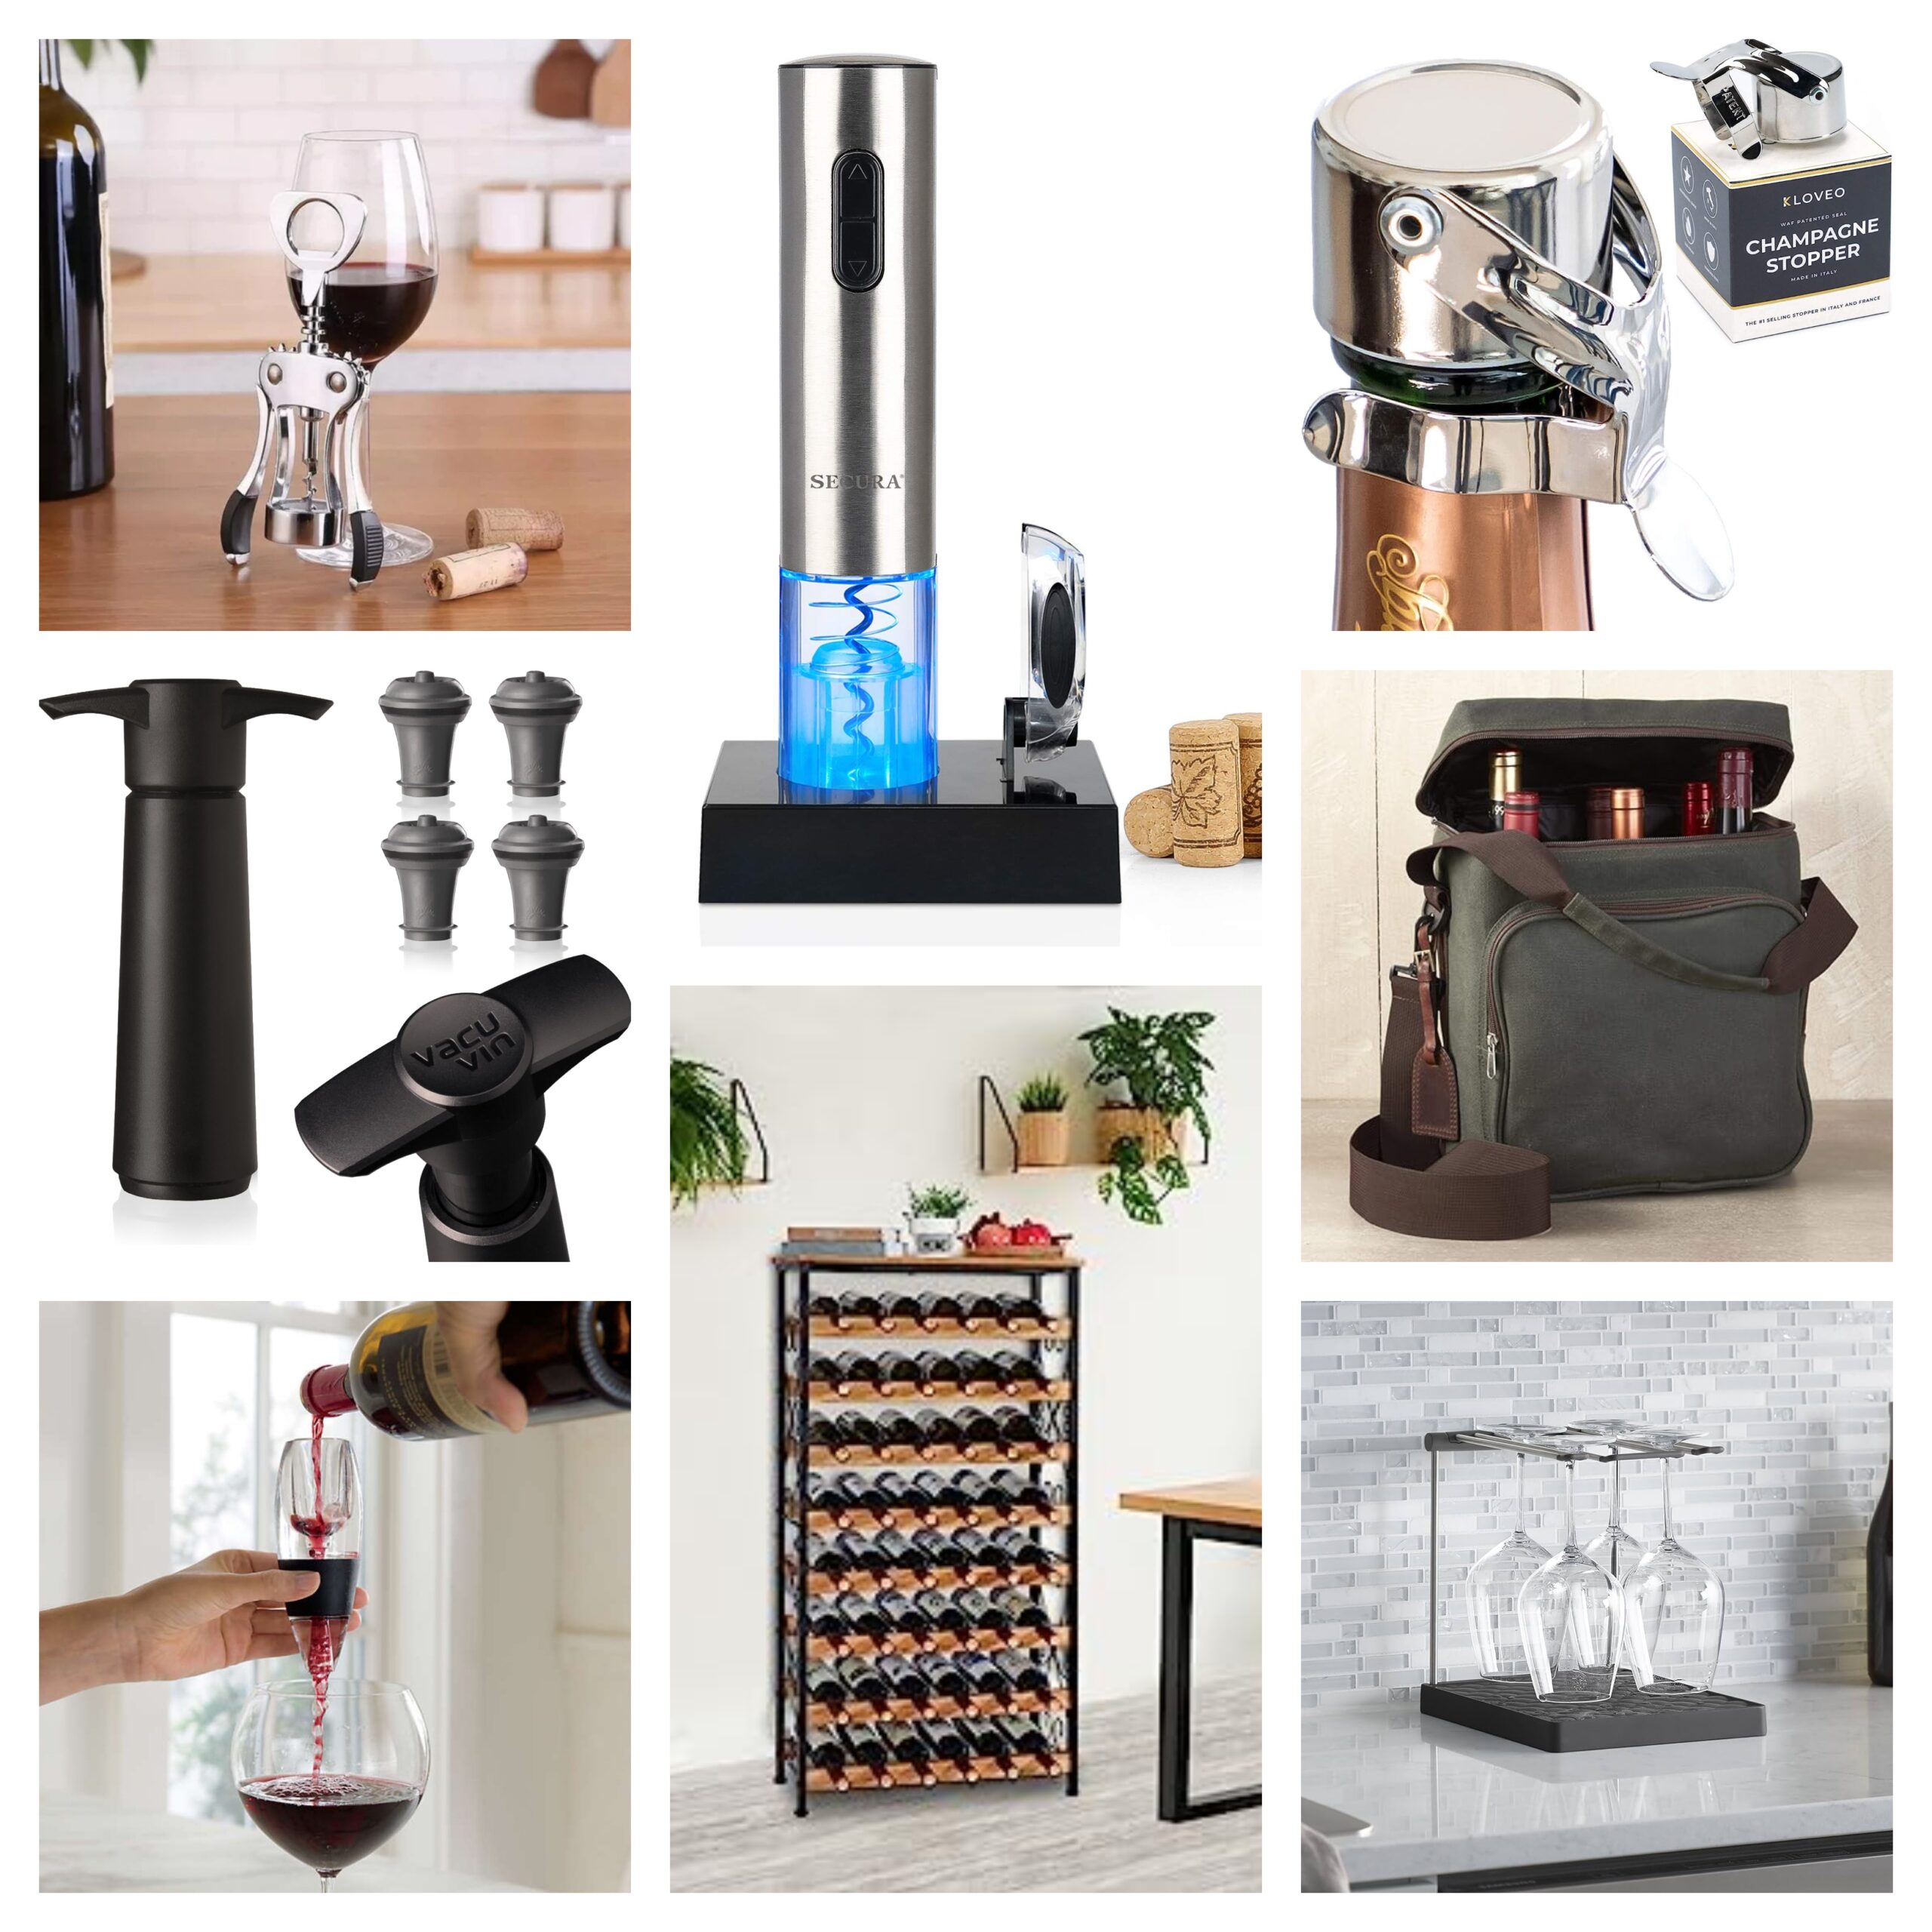 Image of various affordable wine gifts by budget